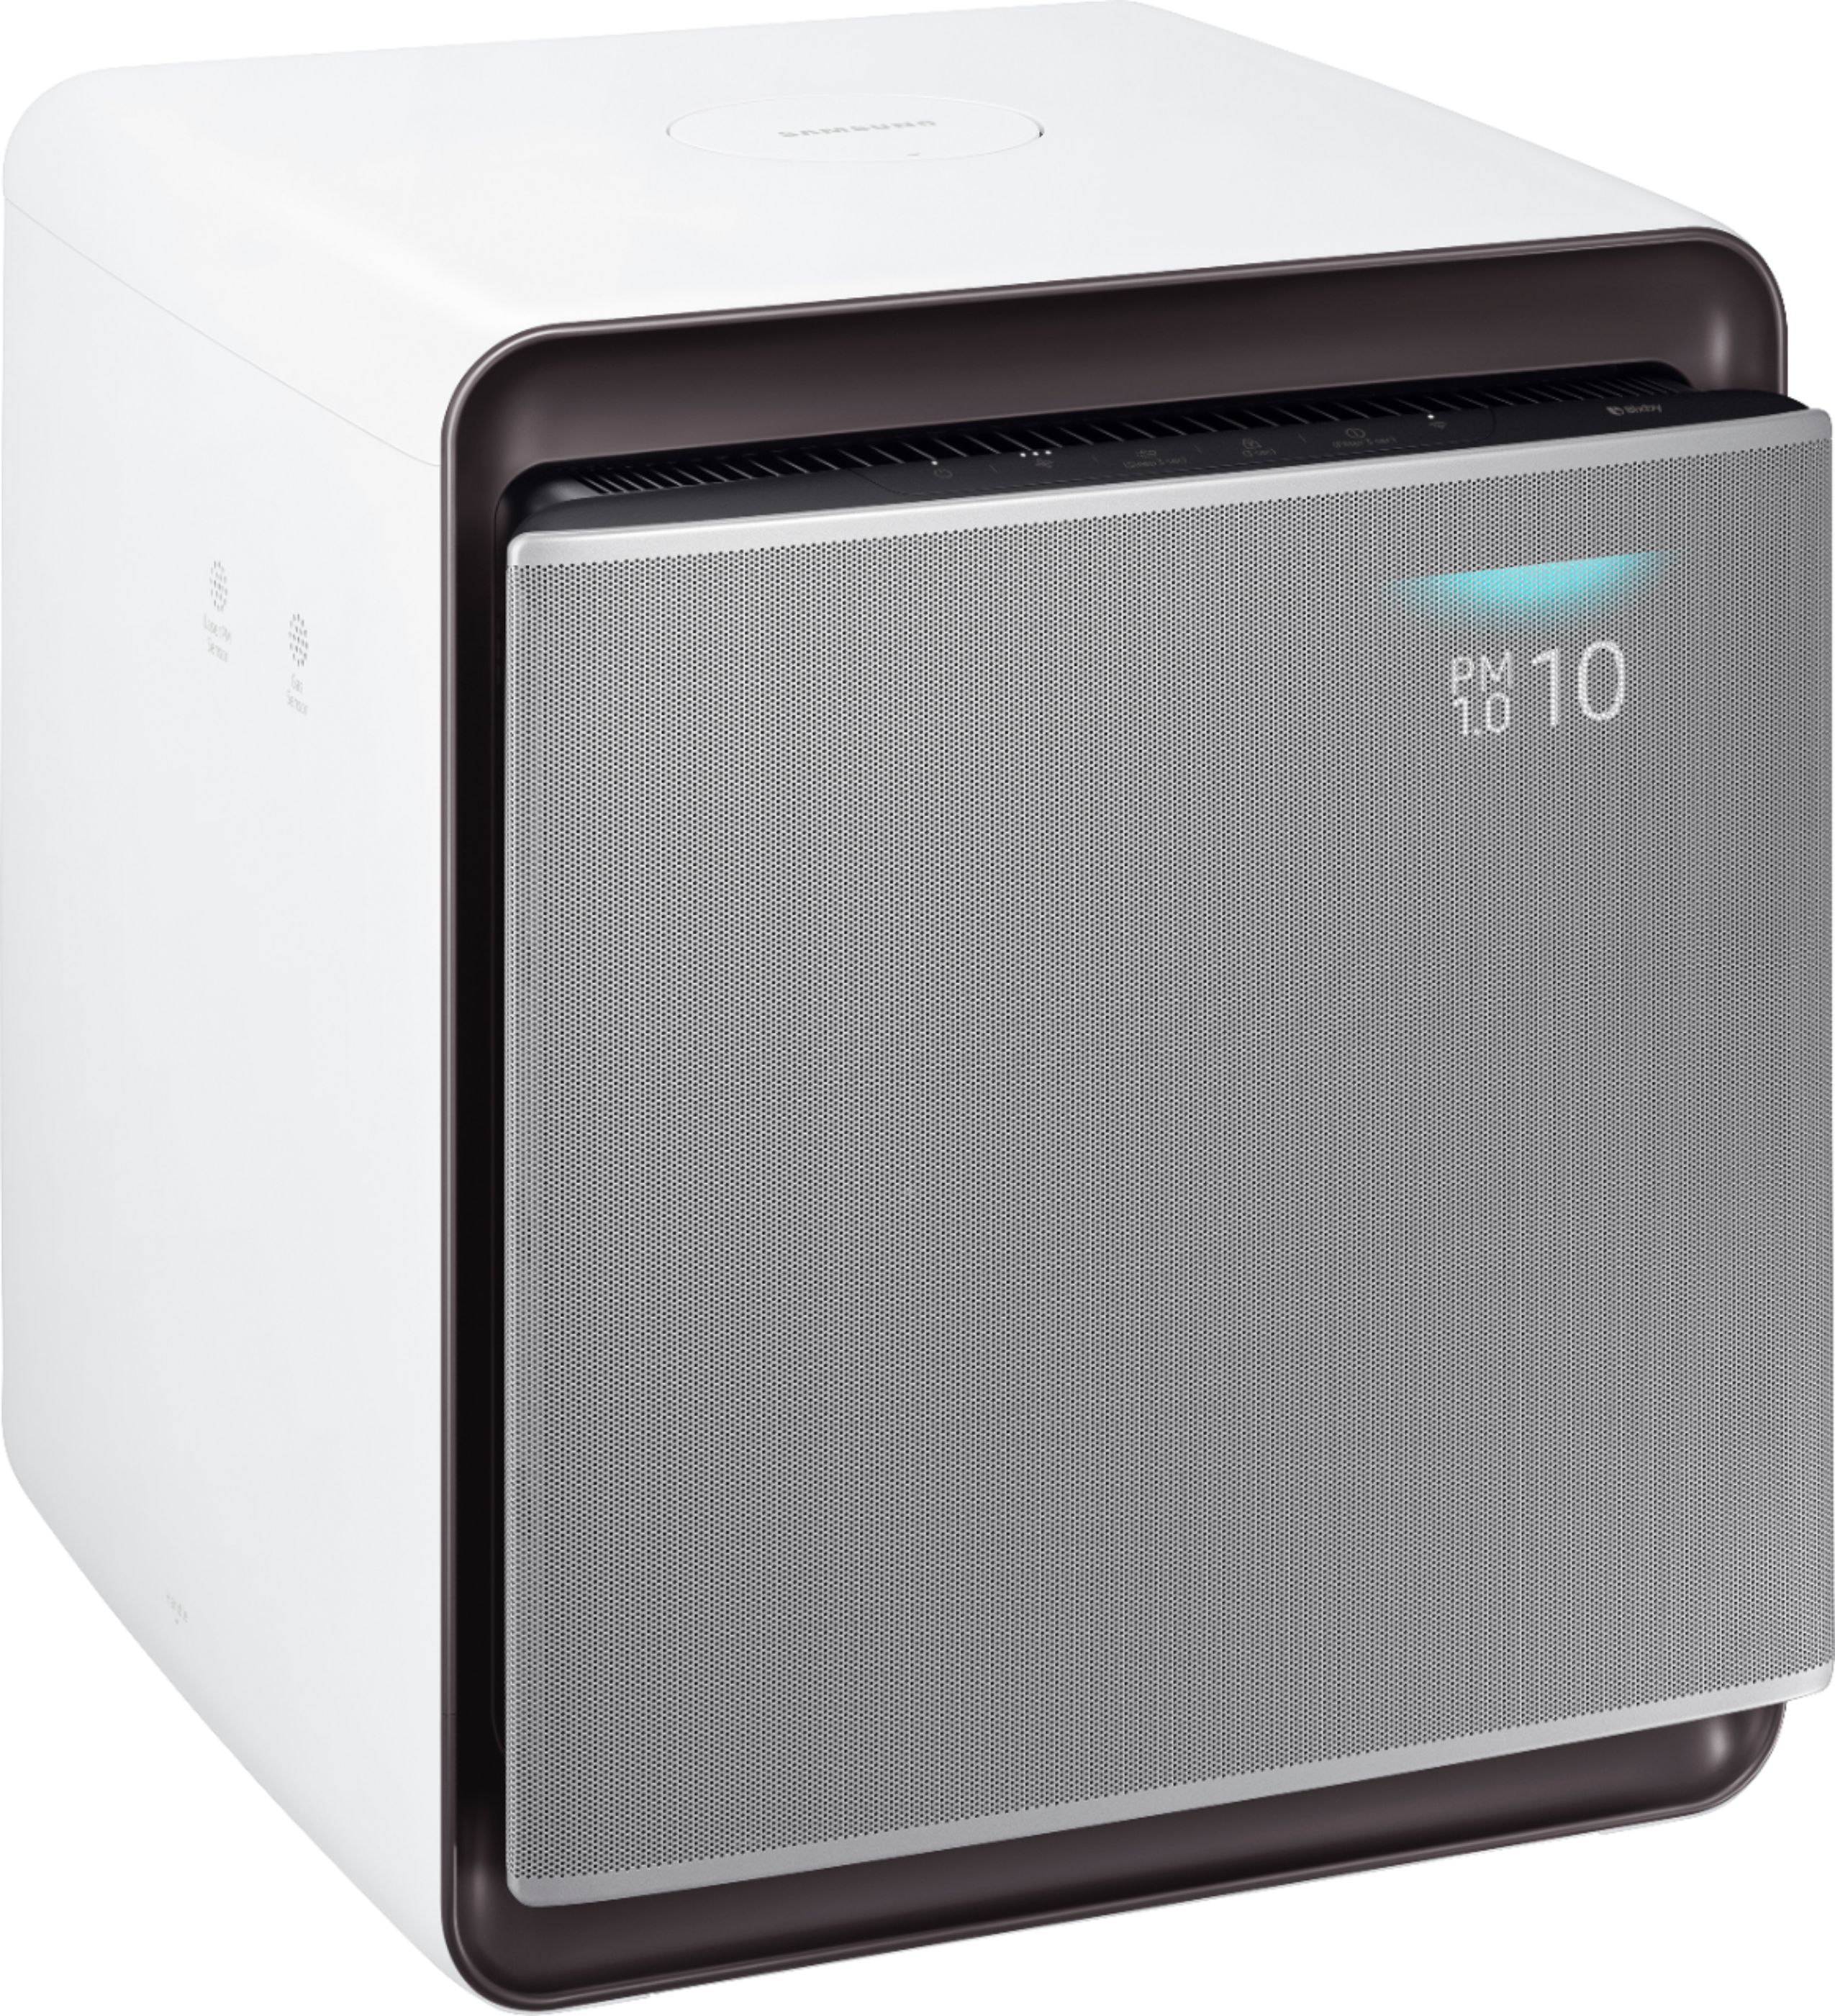 Angle View: Samsung - Cube Smart Air Purifier with Wind-Free Air Purification - Airy White